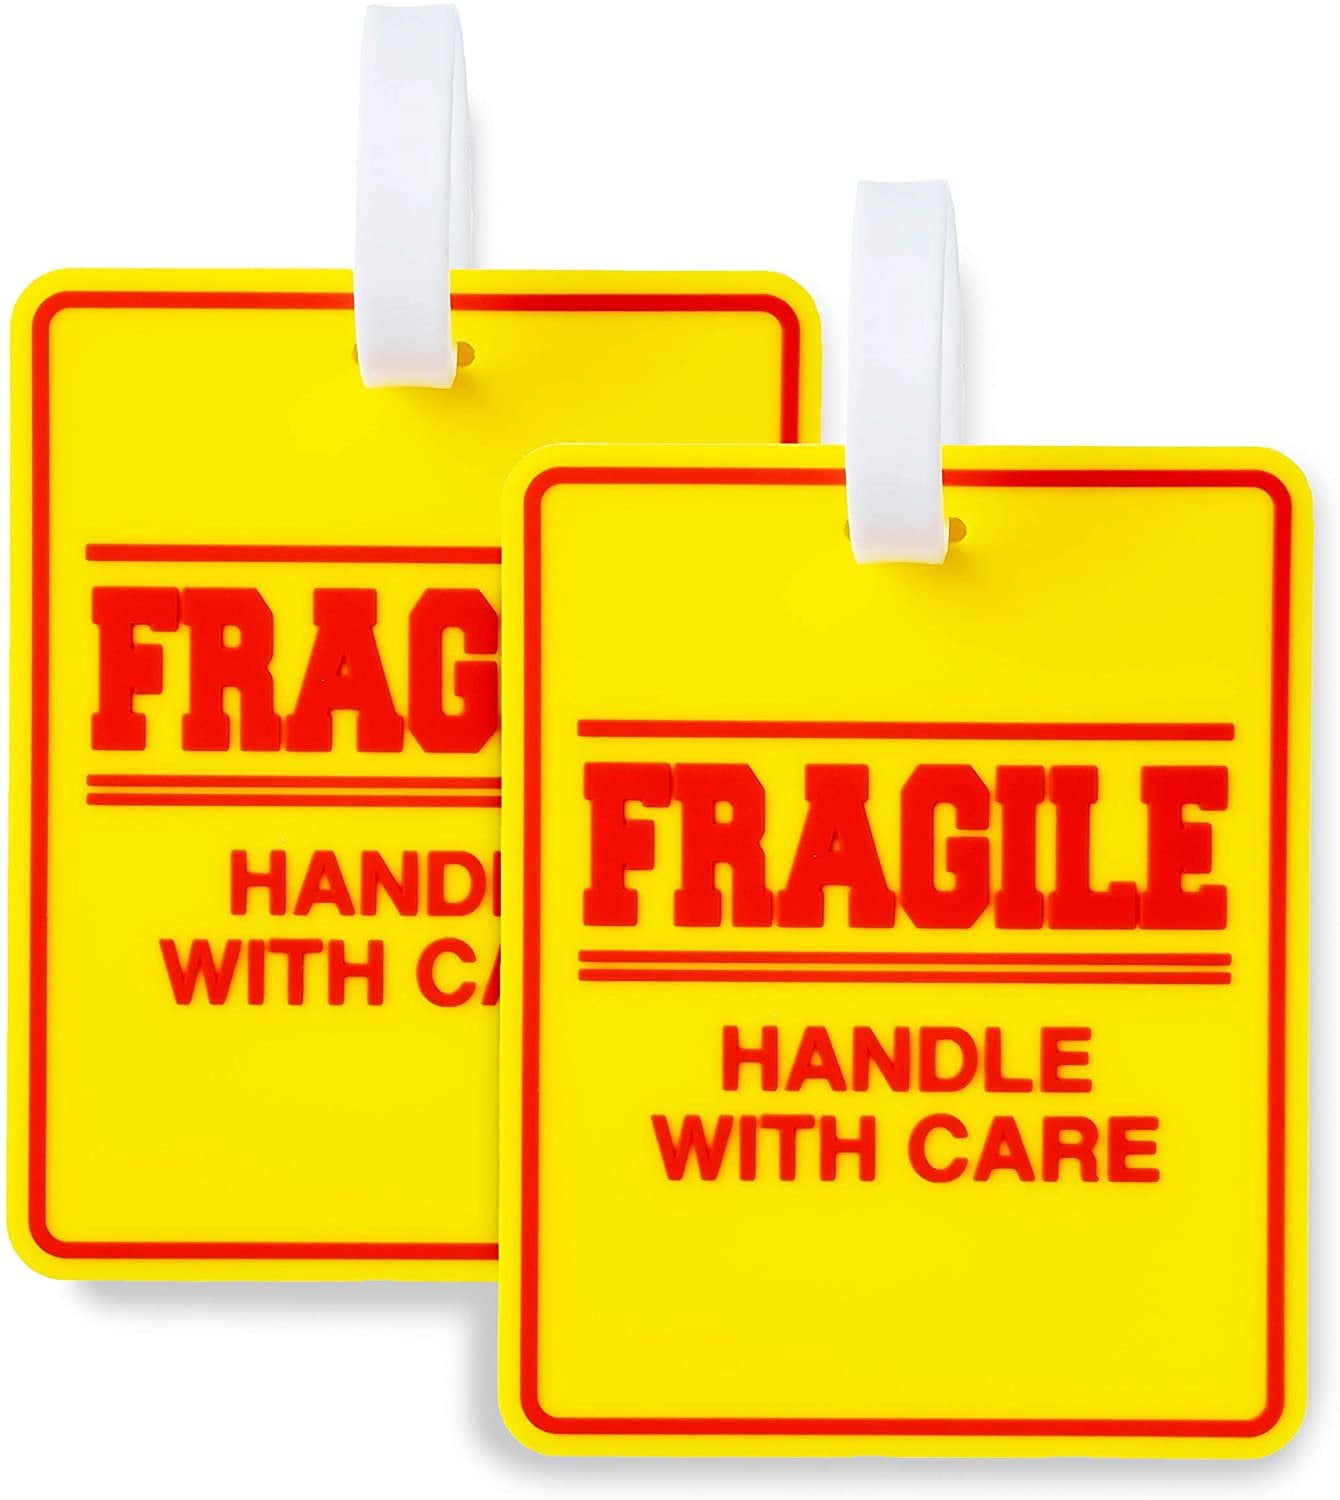 How To Pack Fragile Items In Luggage | Luggage, Packing, Baggage